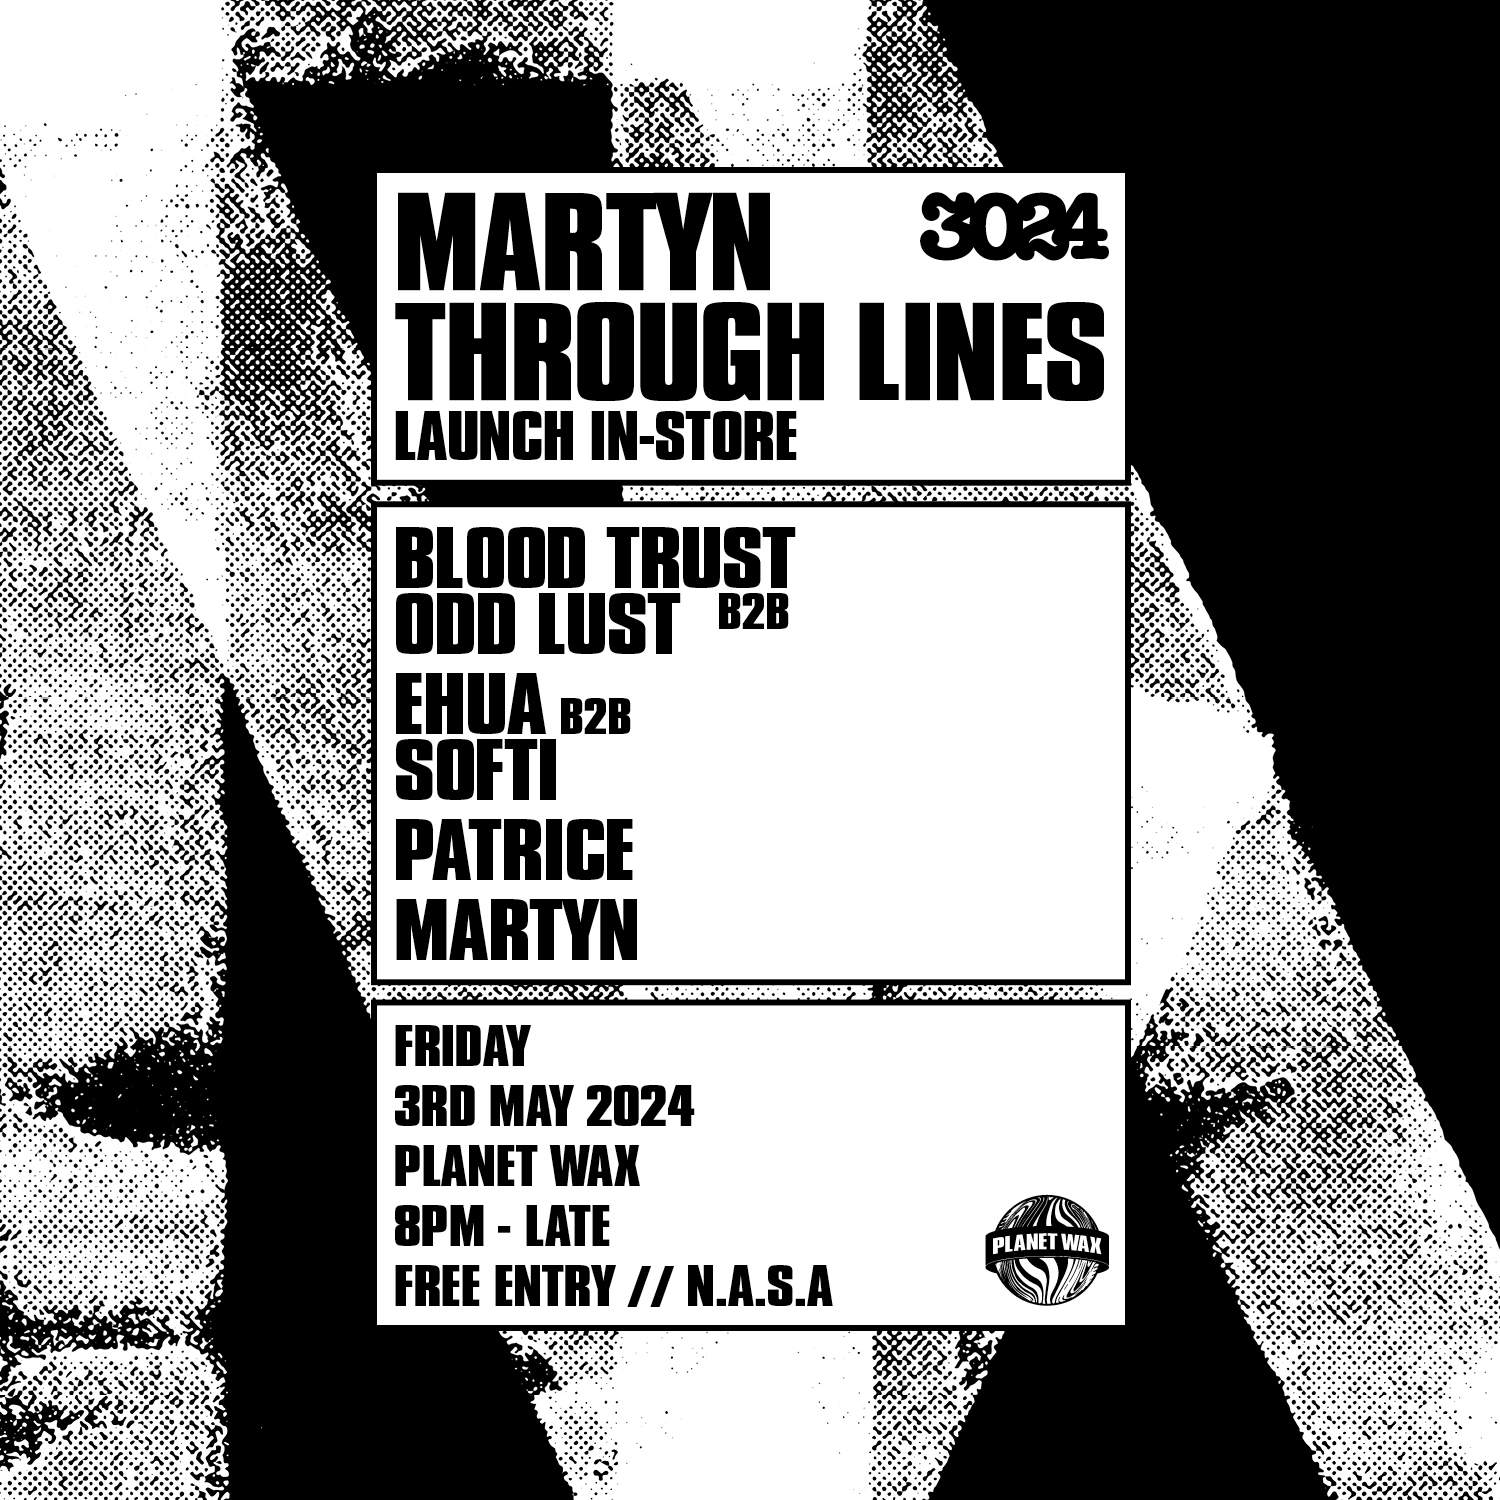 Martyn - THROUGH LINES LAUNCH INSTORE - フライヤー表